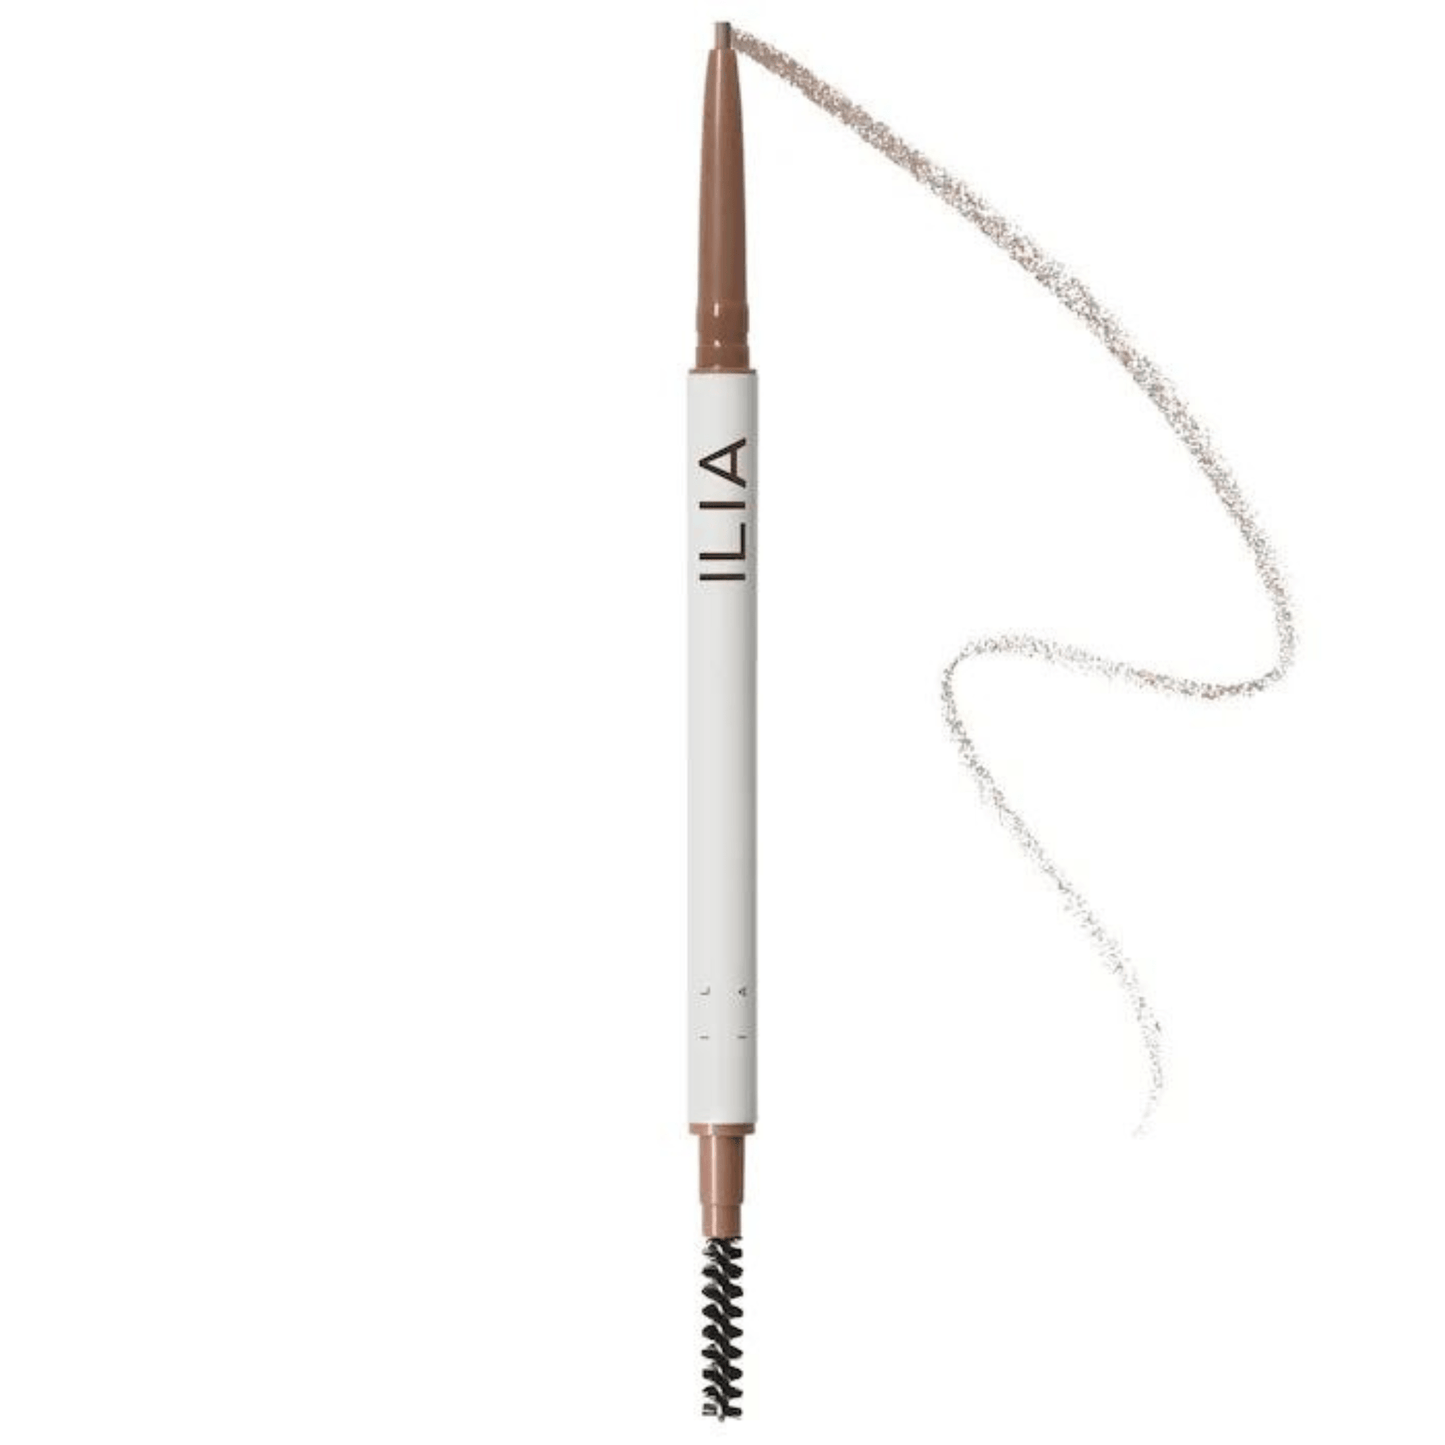 Primary Image of Brow Pencil - Blonde